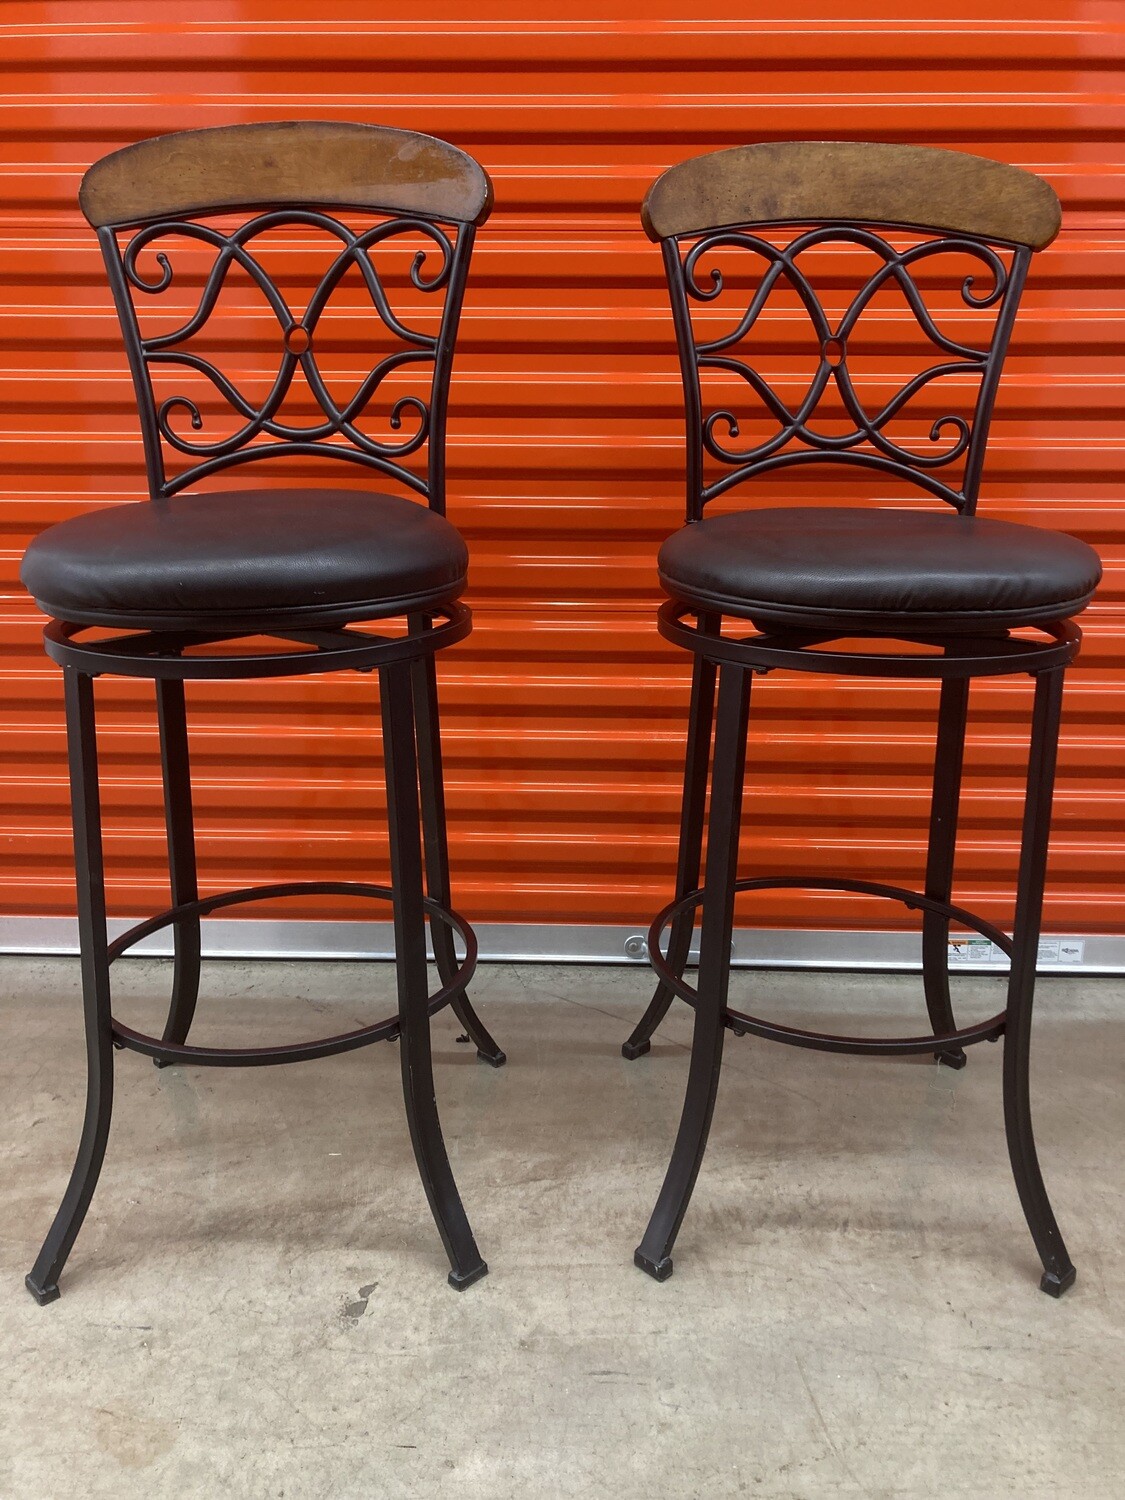 Swivel Bar Stools, set, scroll-work back #2126 - 2 MOS. TO SELL, @50% off